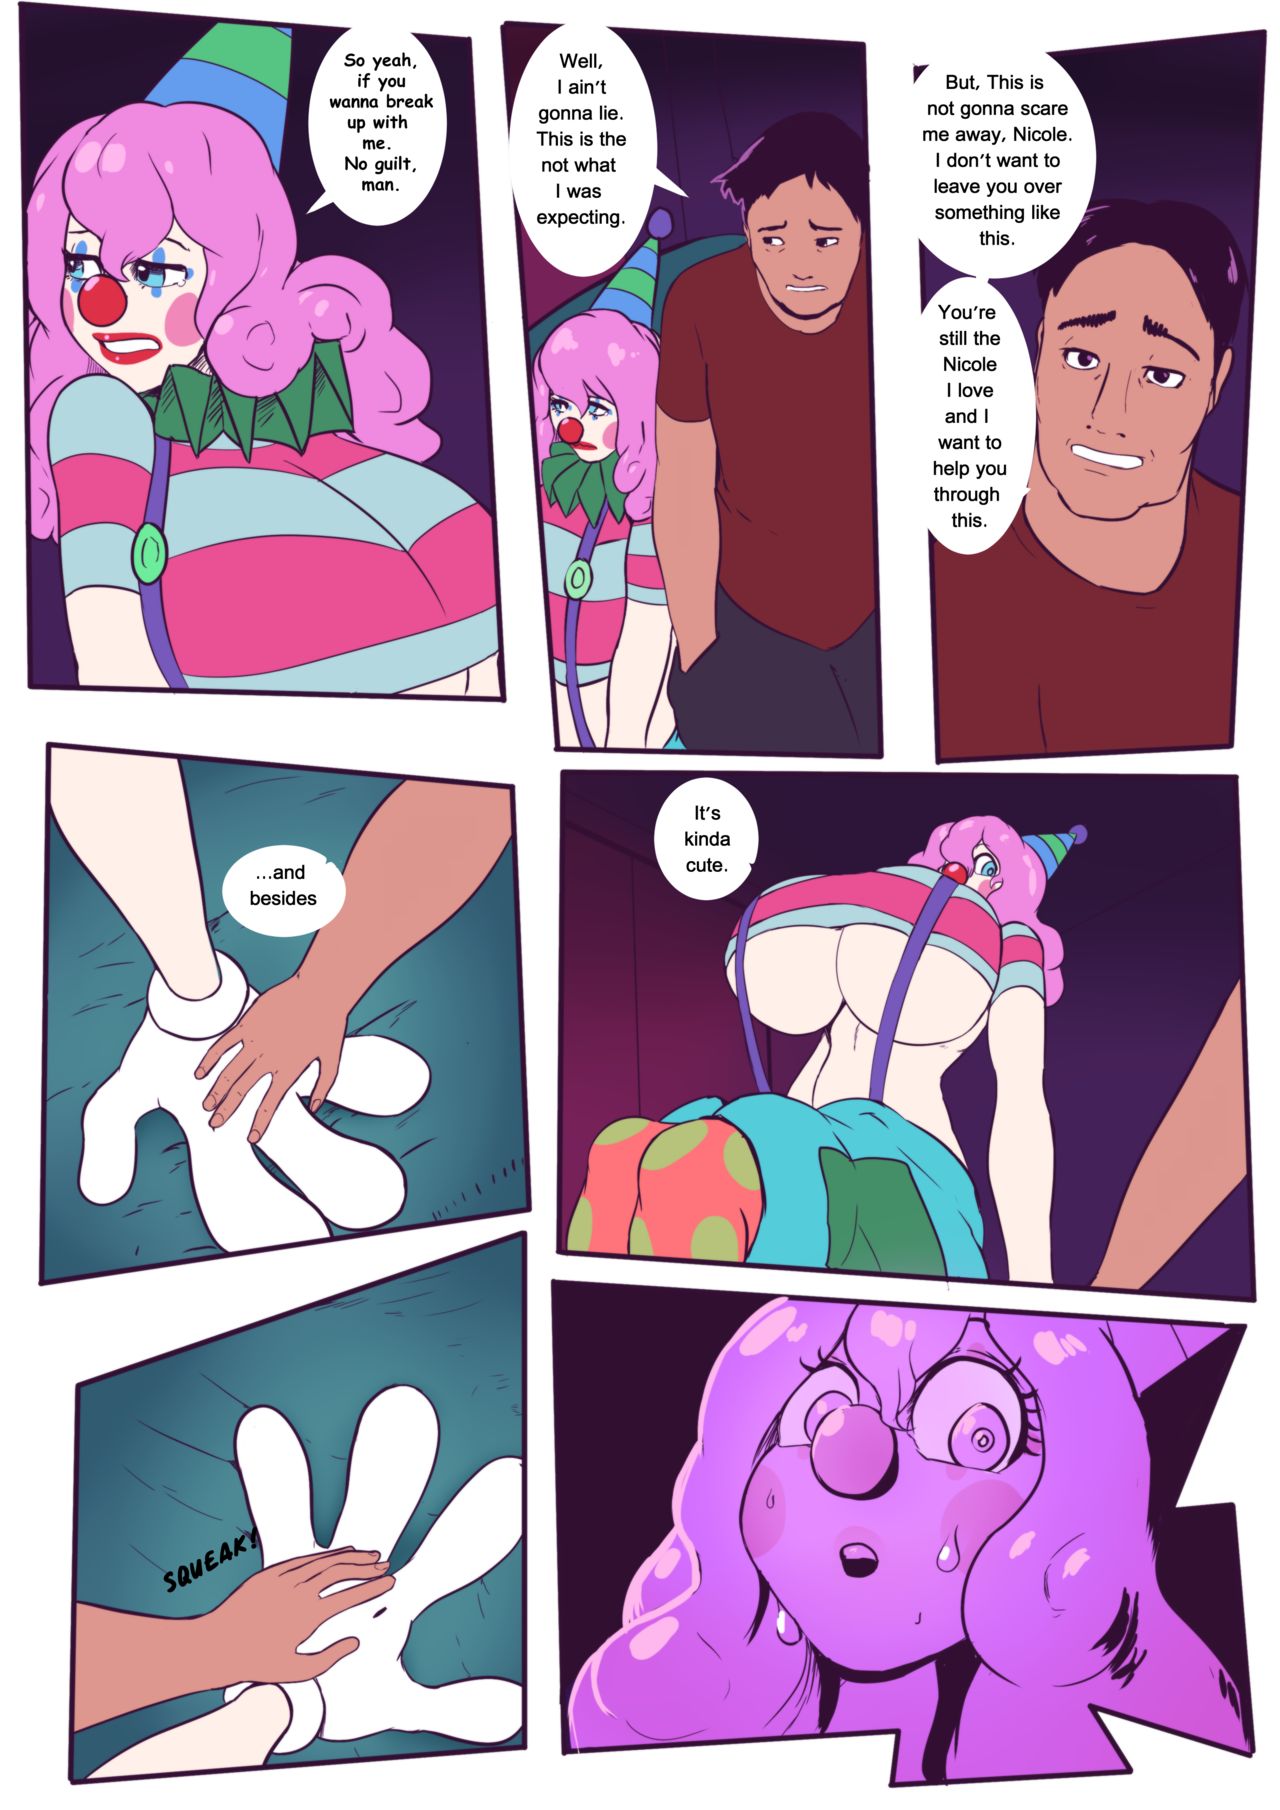 A Perfectly Normal Comic Where Nothing Weird Happens Lemonfont 13